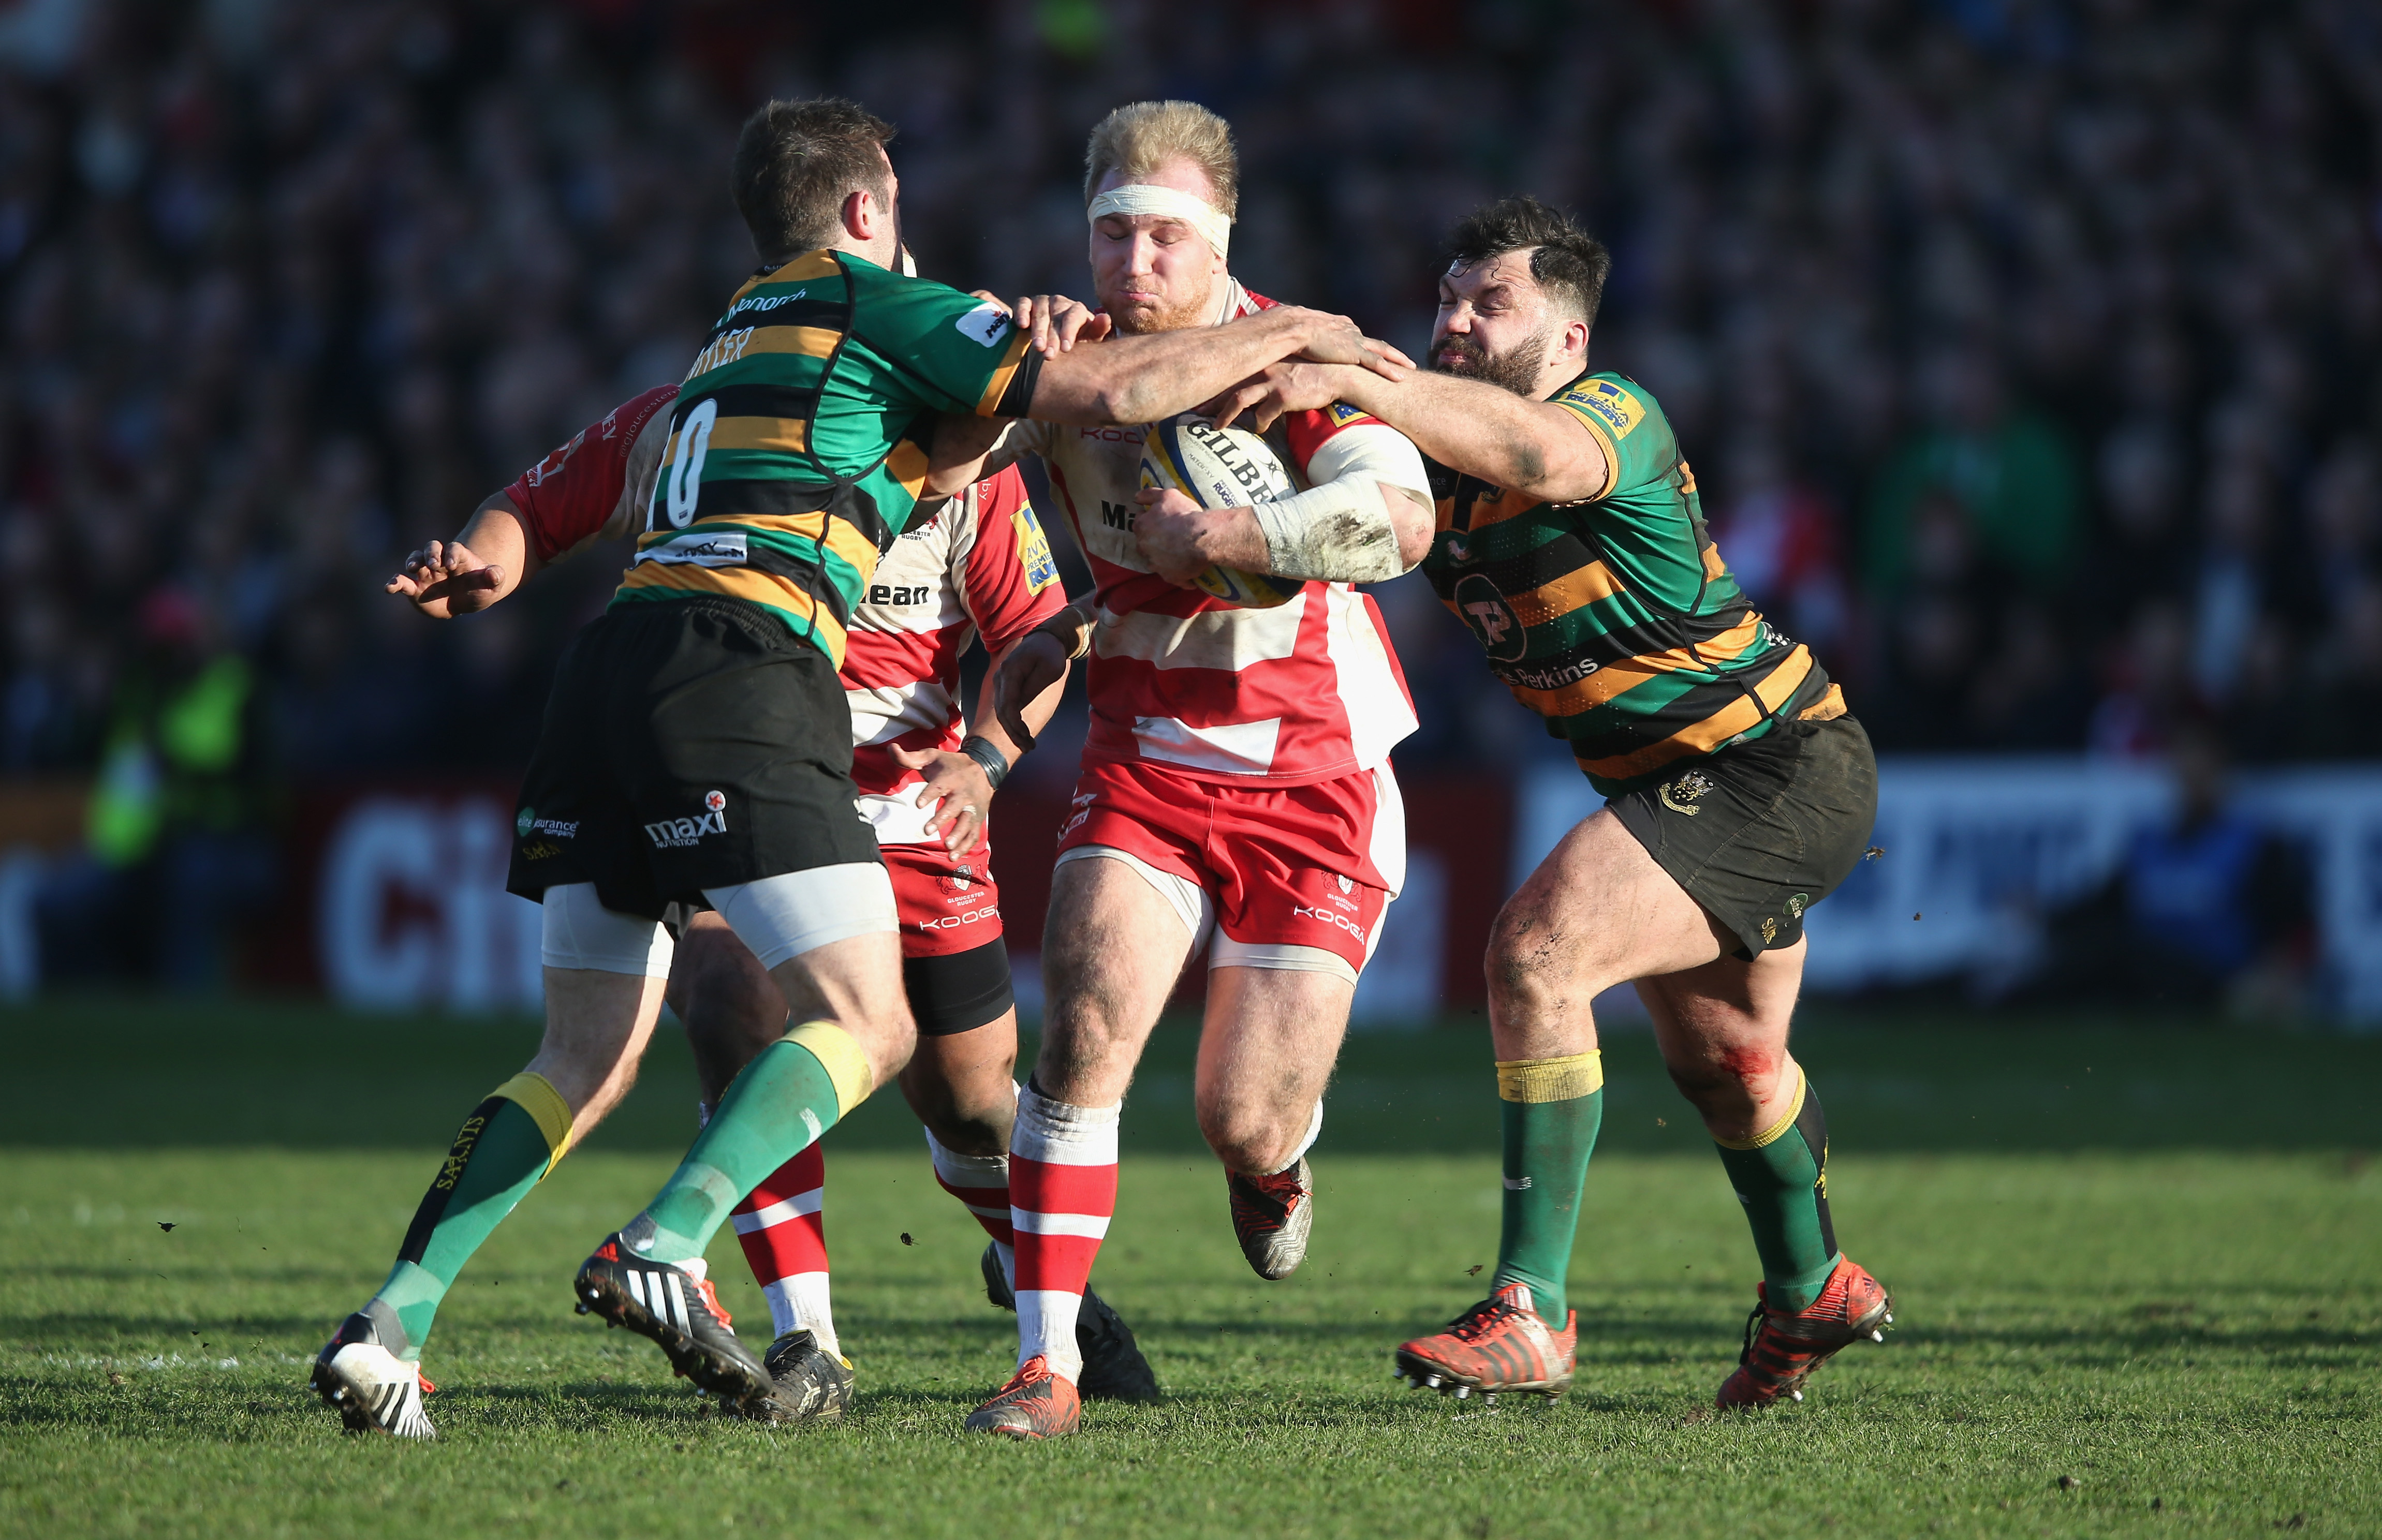 during the Aviva Premiership match between Gloucester and Northampton Saints at Kingsholm Stadium on March 7, 2015 in Gloucester, England.